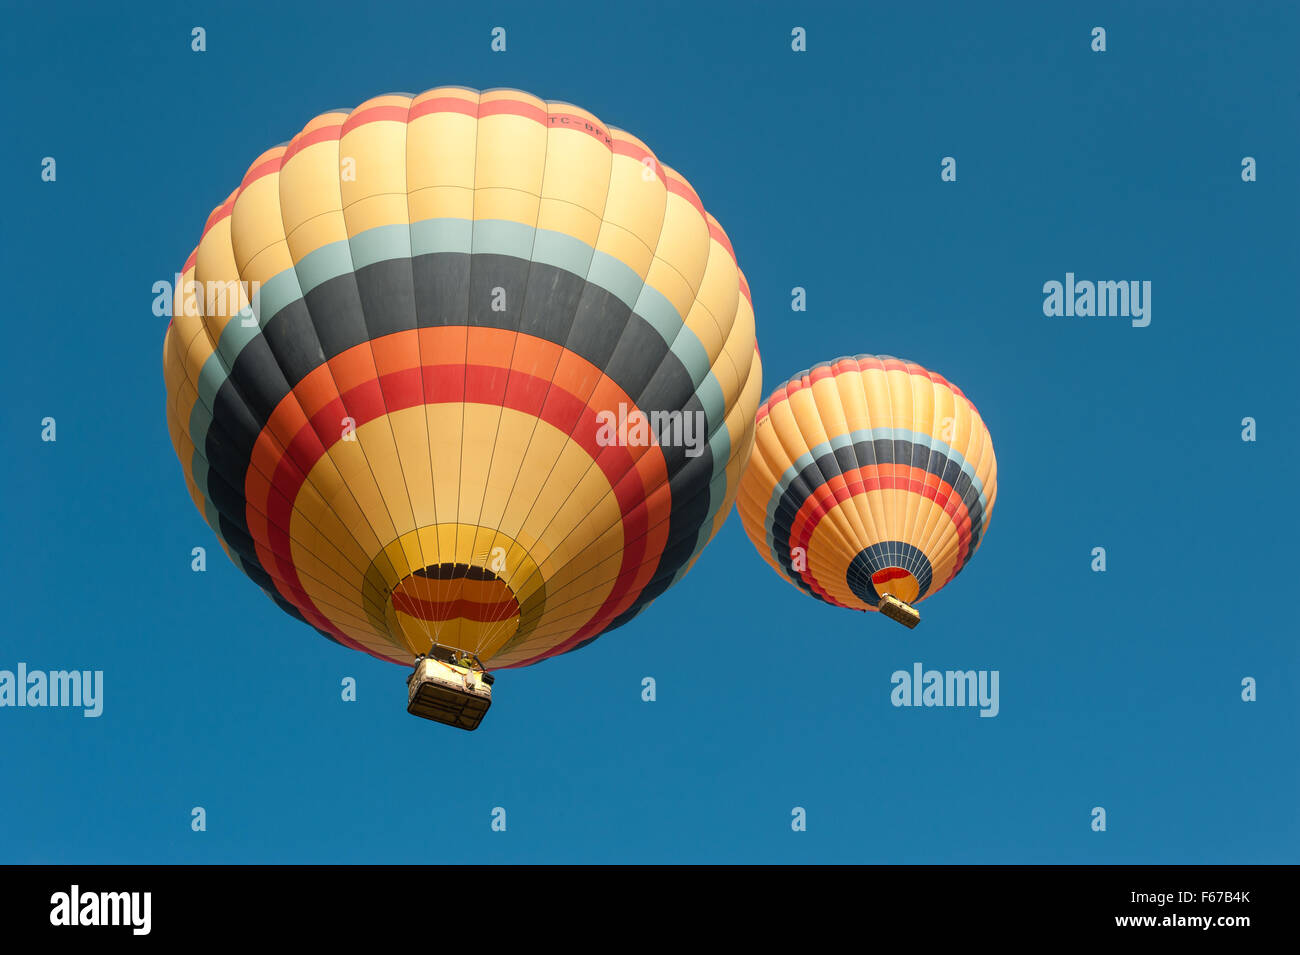 Two balloons with a clear blue sky in Cappadocia, Turkey. Stock Photo